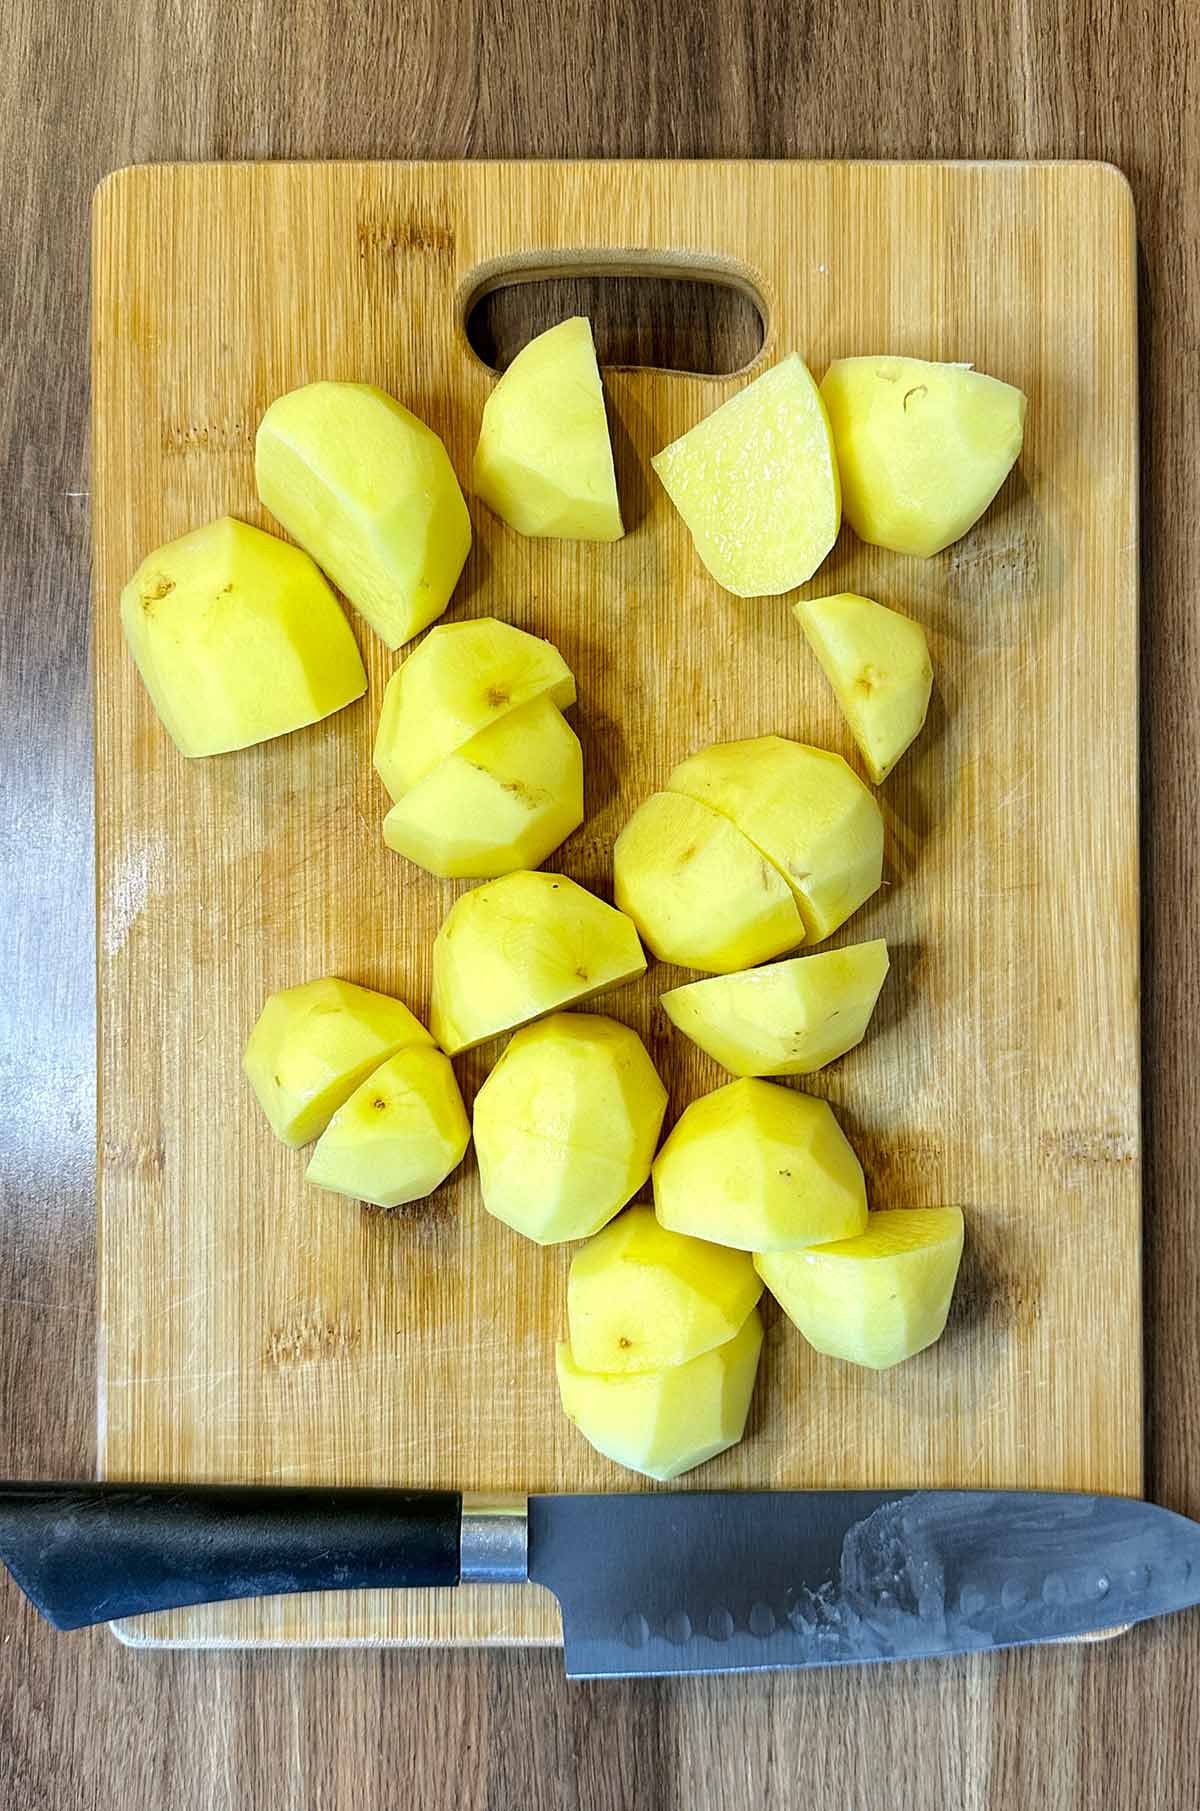 A chopping board with peeled and quartered potatoes on it.